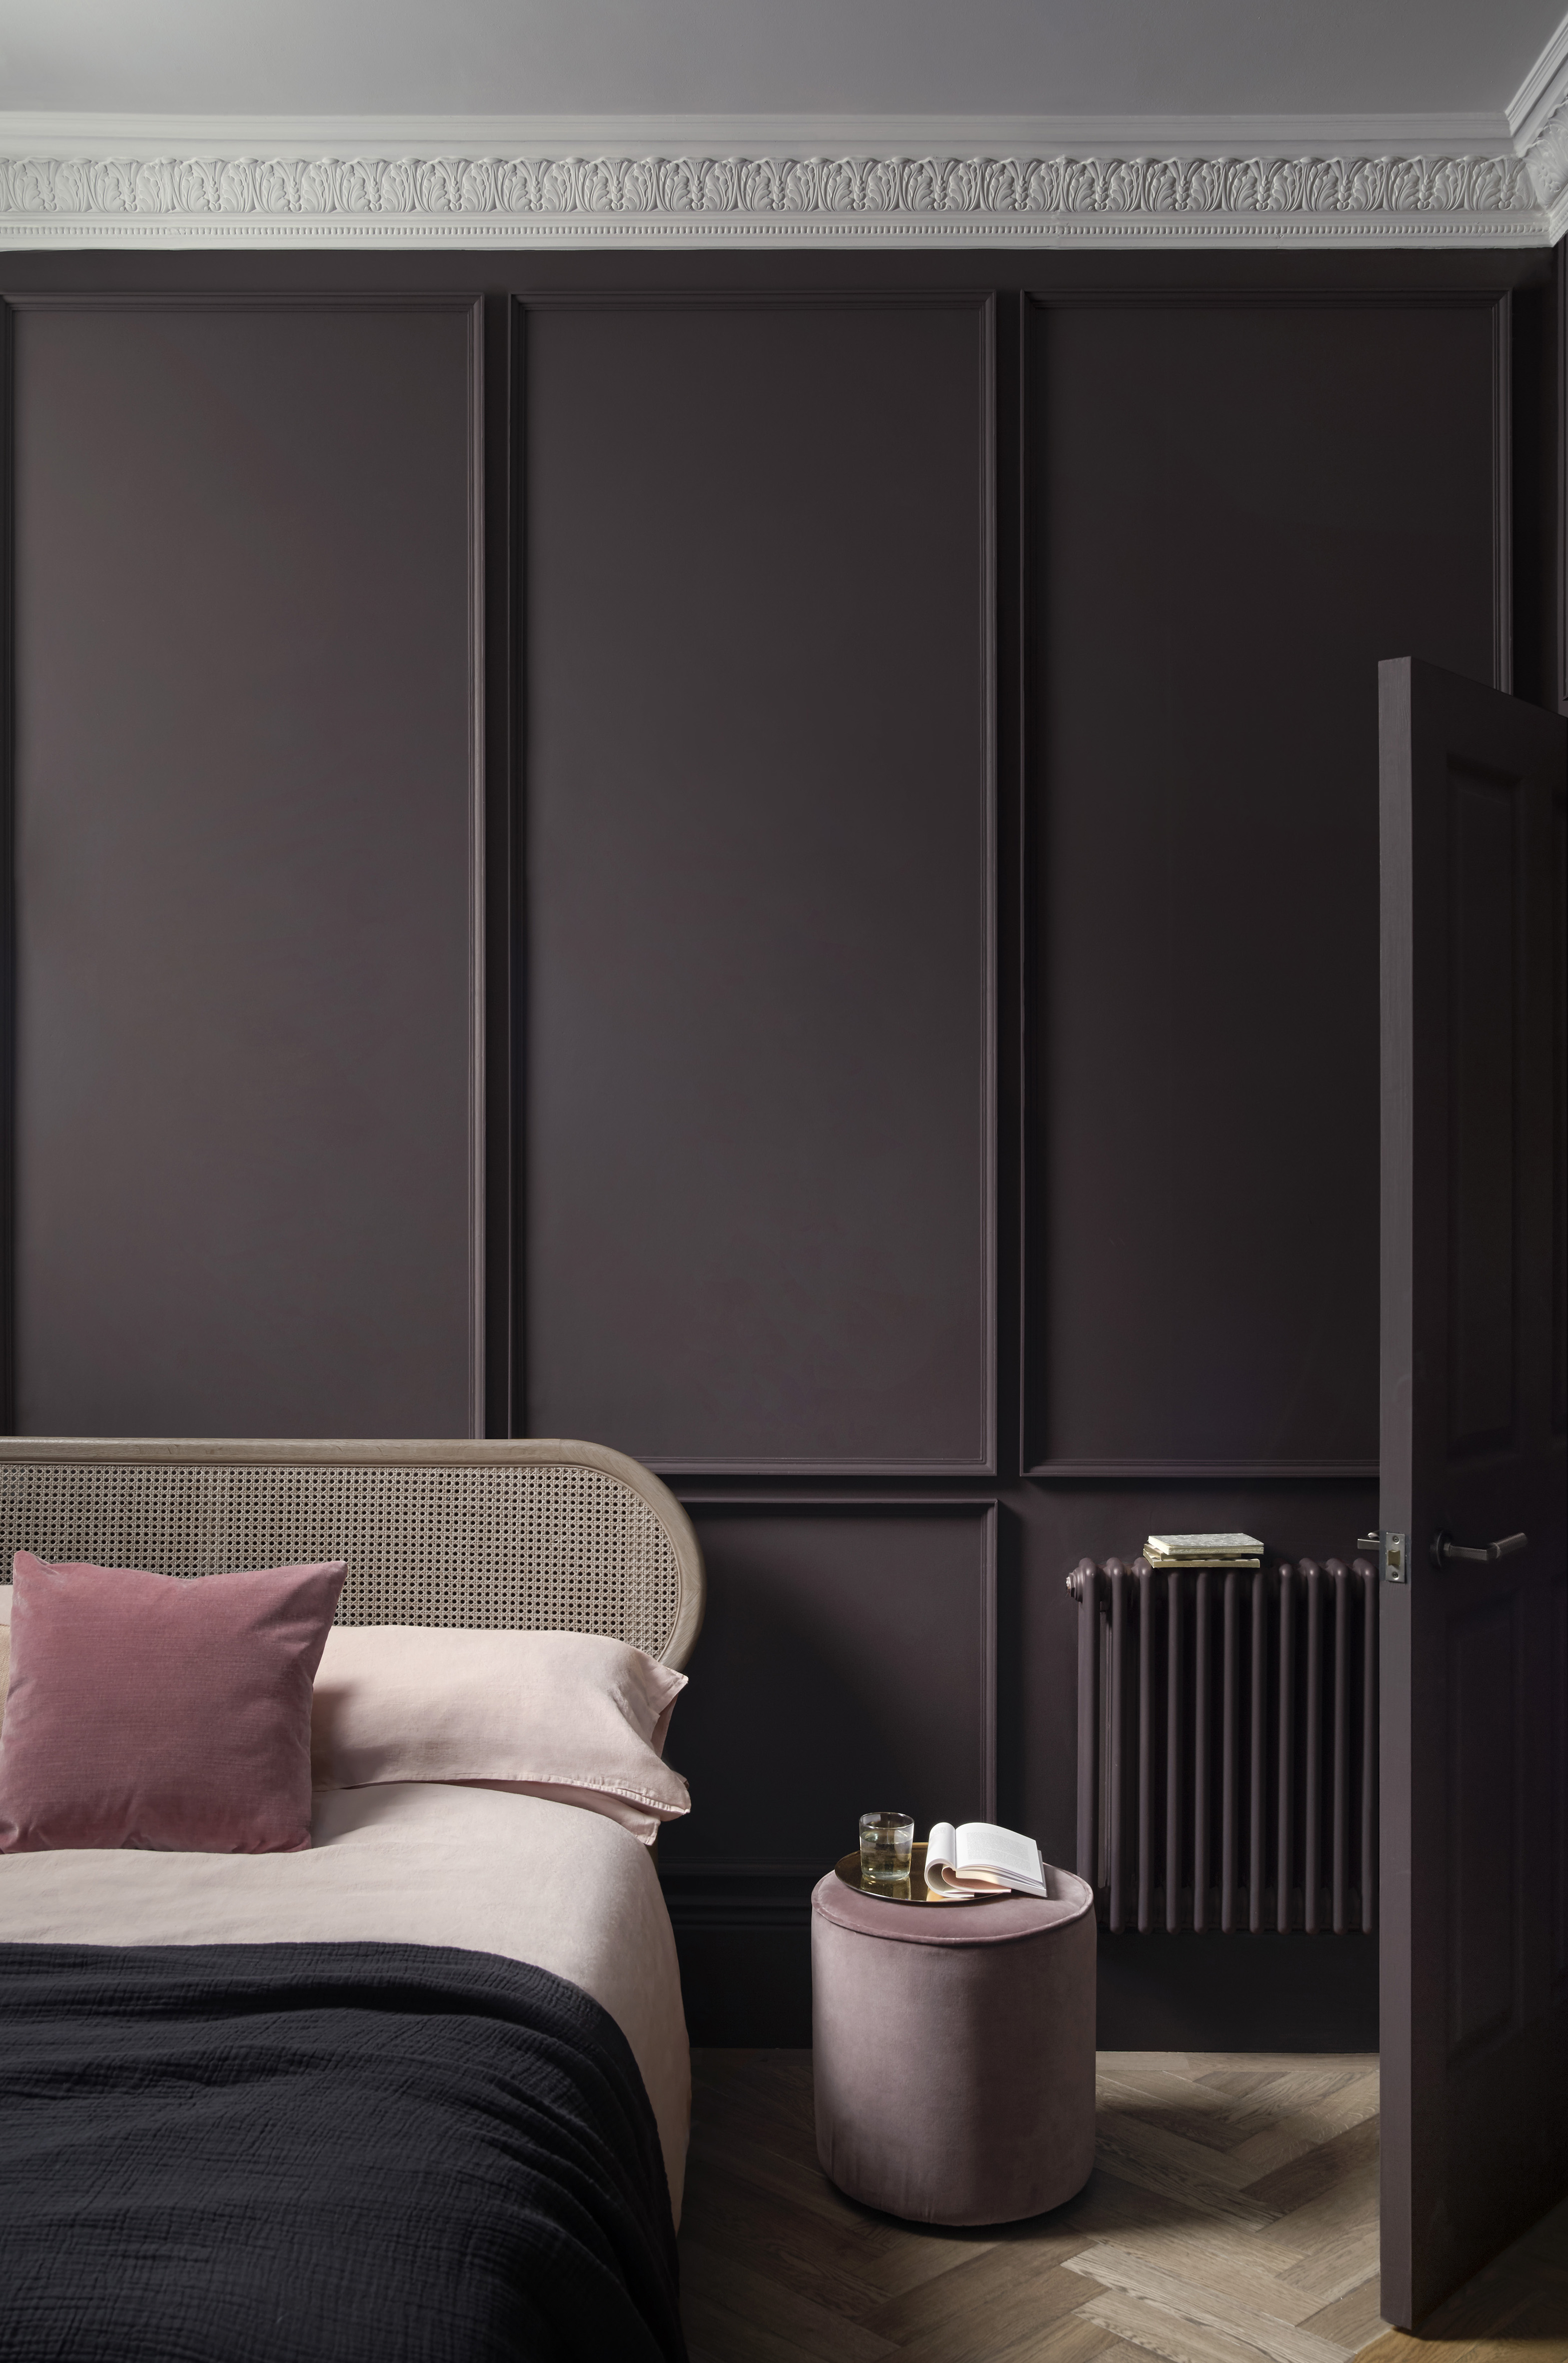 A deep aubergine scheme demonstrating the best bedroom colors, with panelled walls, a rattan bed and pale pink accessories.